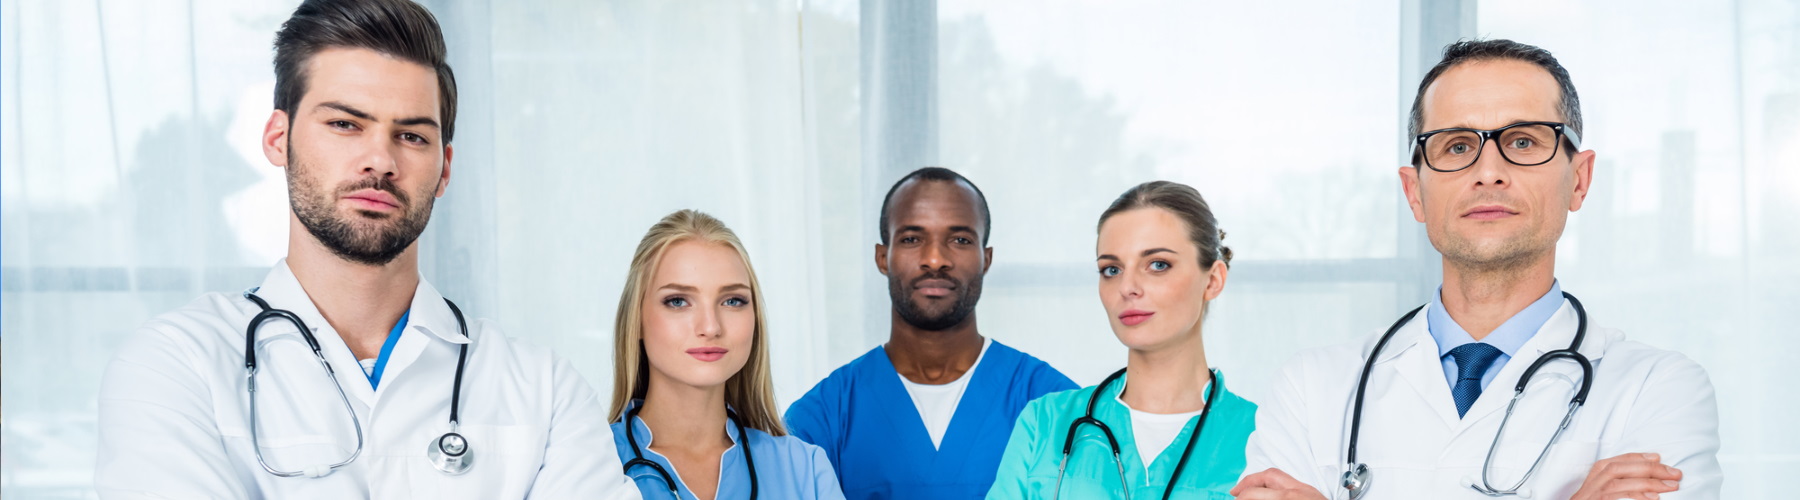 Group of medical professionals with arms crossed